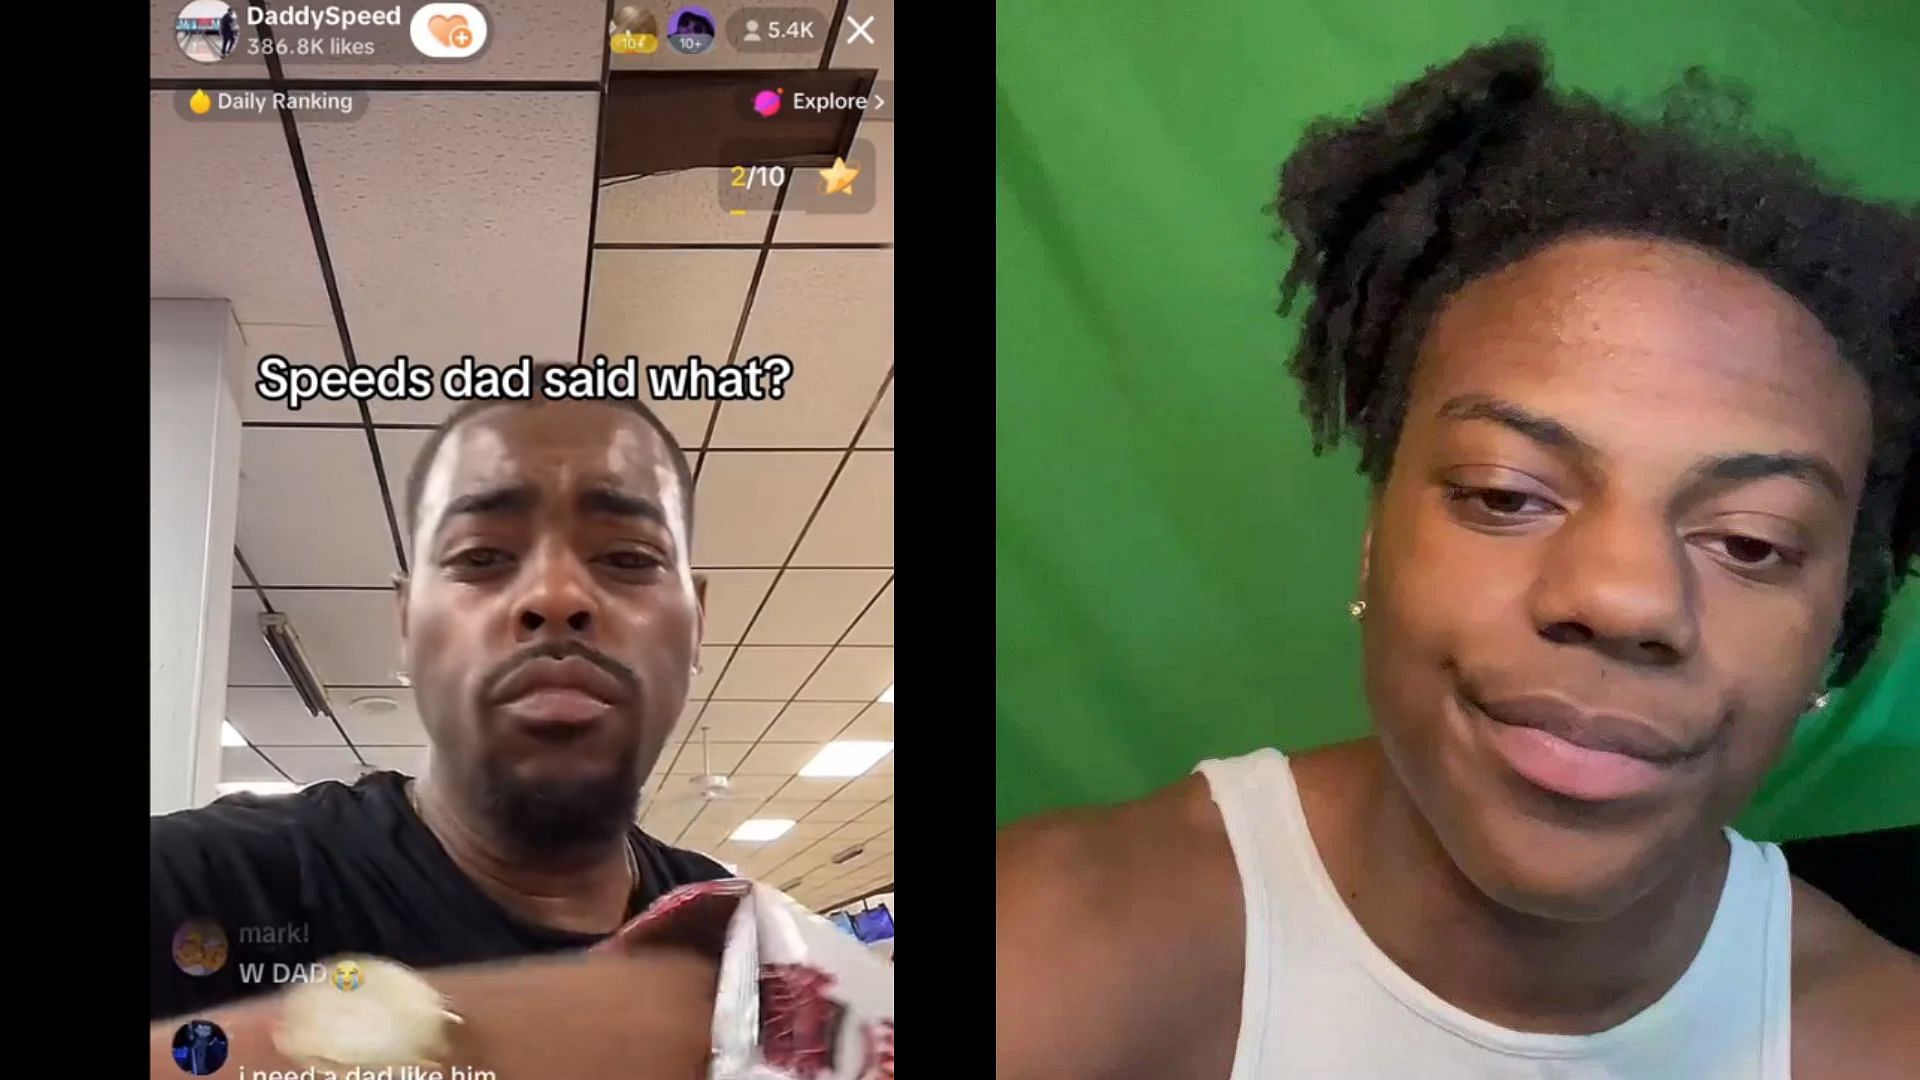 Why would you call me IShowM*at?: IShowSpeed confronts dad for